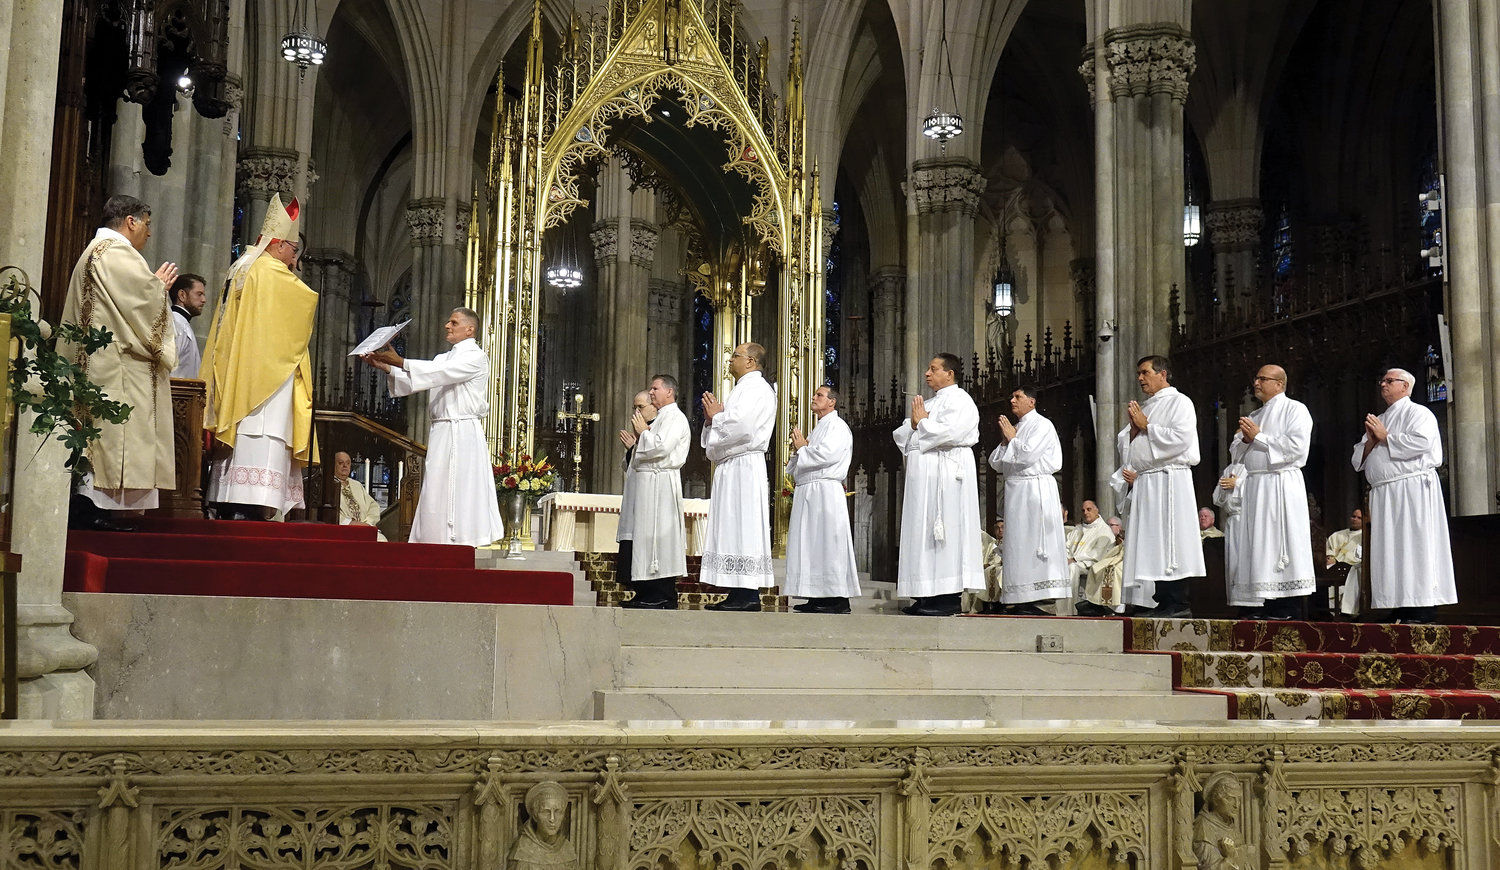 The 10 men to be ordained to the permanent diaconate gather before Cardinal Dolan June 18 during the Rite of Ordination at St. Patrick’s Cathedral.